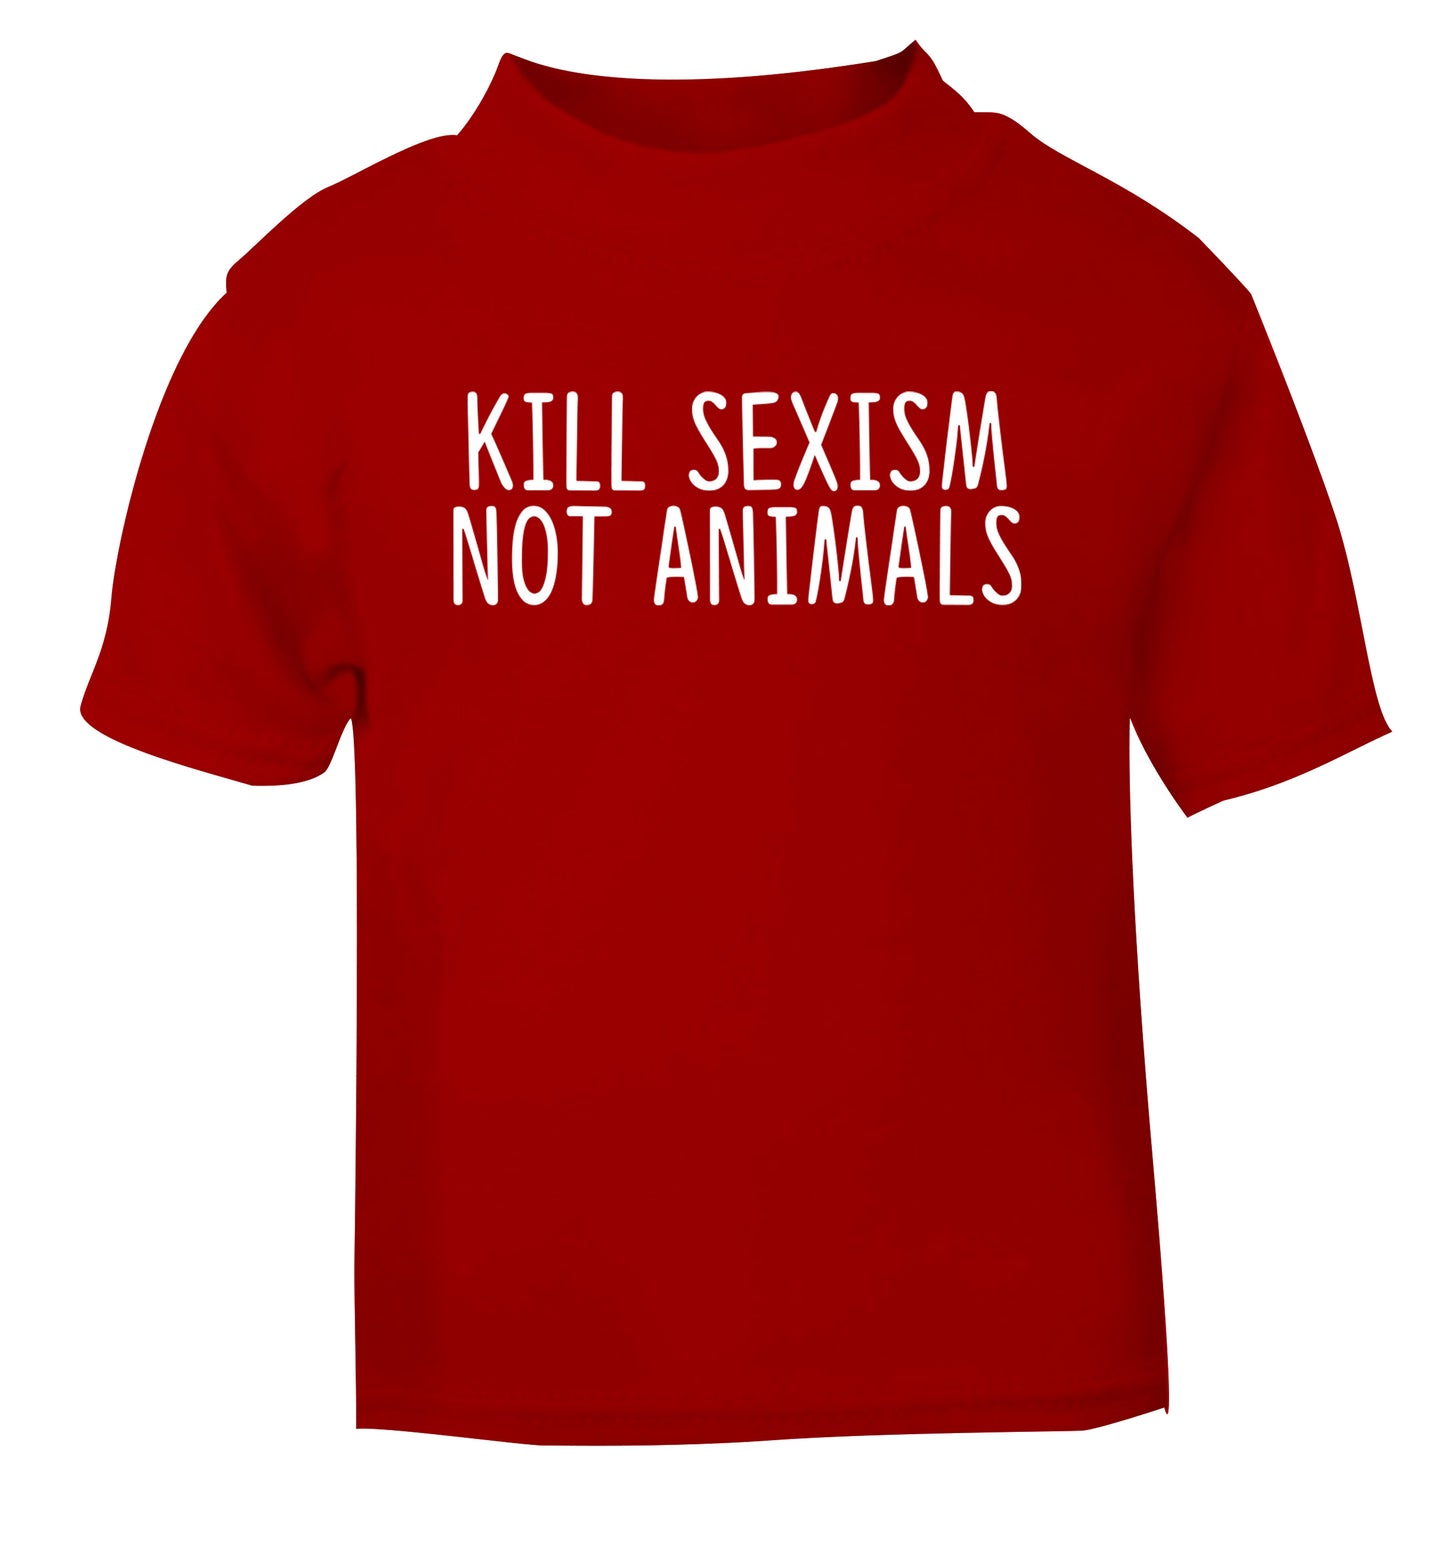 Kill Sexism Not Animals red Baby Toddler Tshirt 2 Years